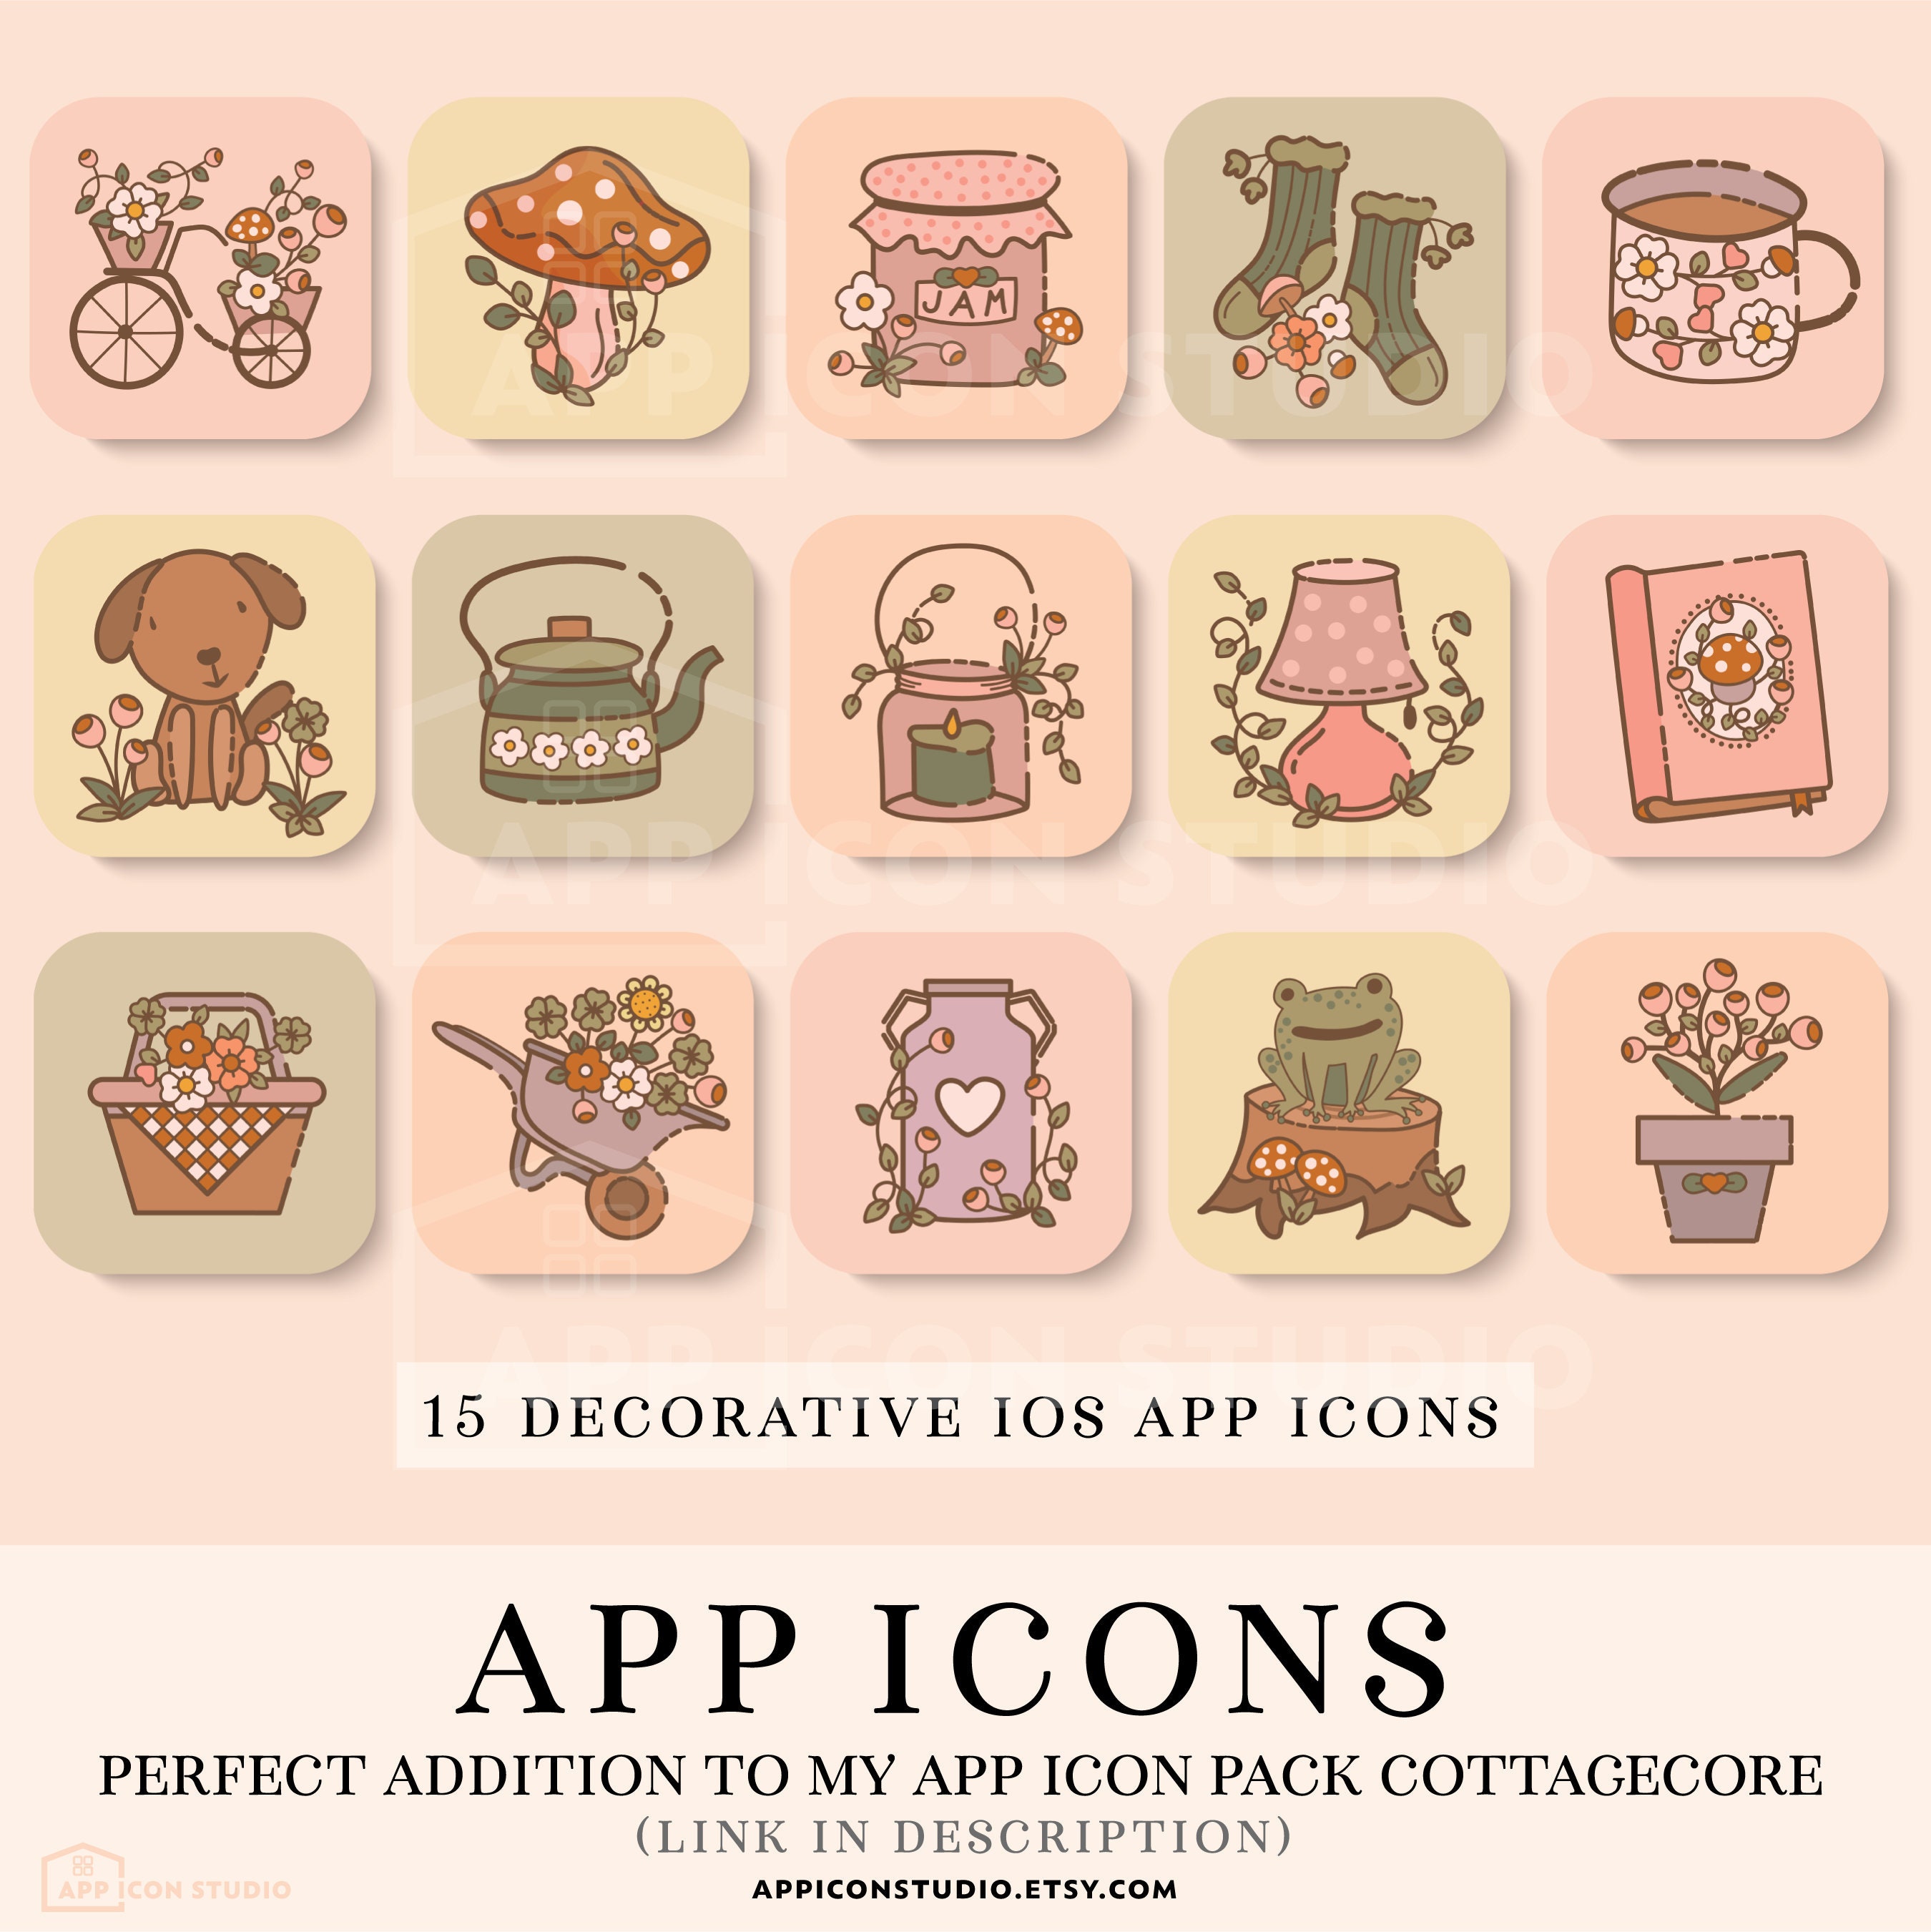 Cute app icons collection app icons cute for your phone